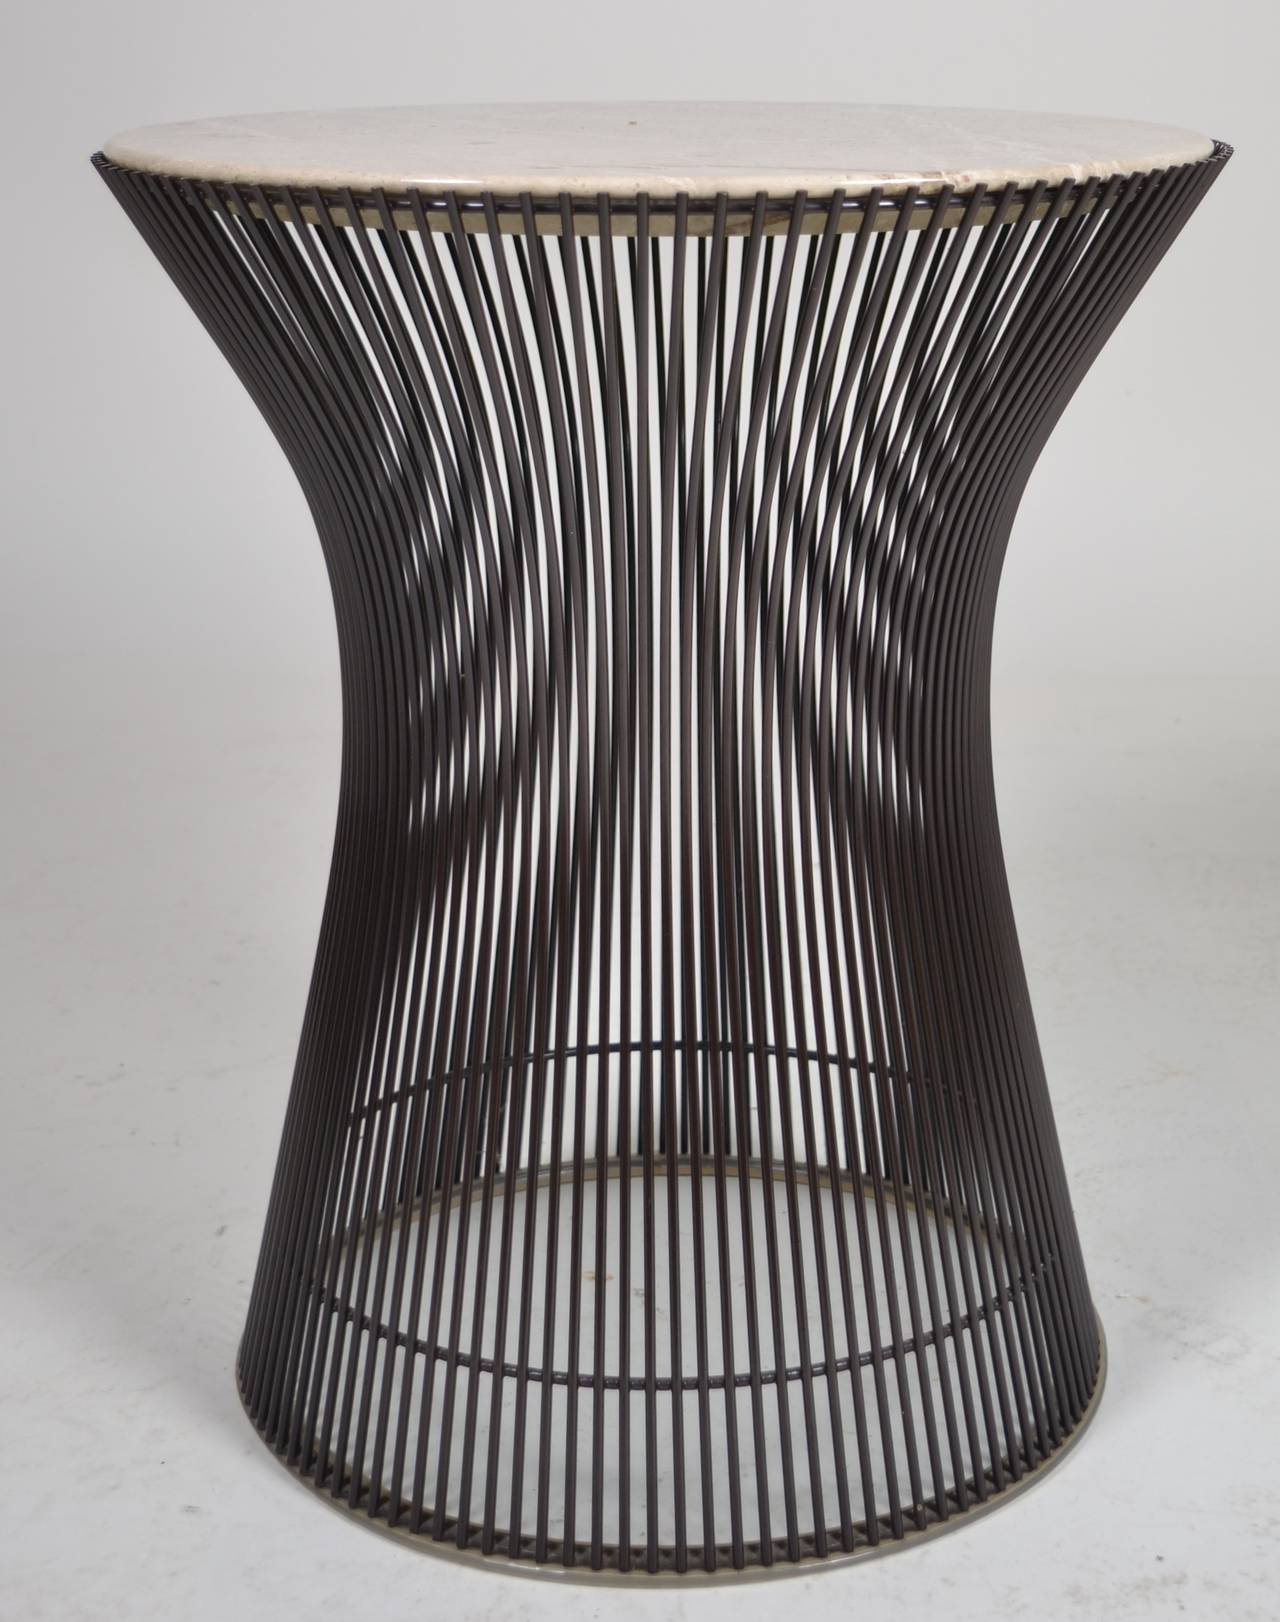 An especially attractive example of the iconic Platner side table. Excellent condition, with dark bronze base and taupe figured, knife edged marble inset into frame. Introduced in 1966, this table was made in the early 1970s.